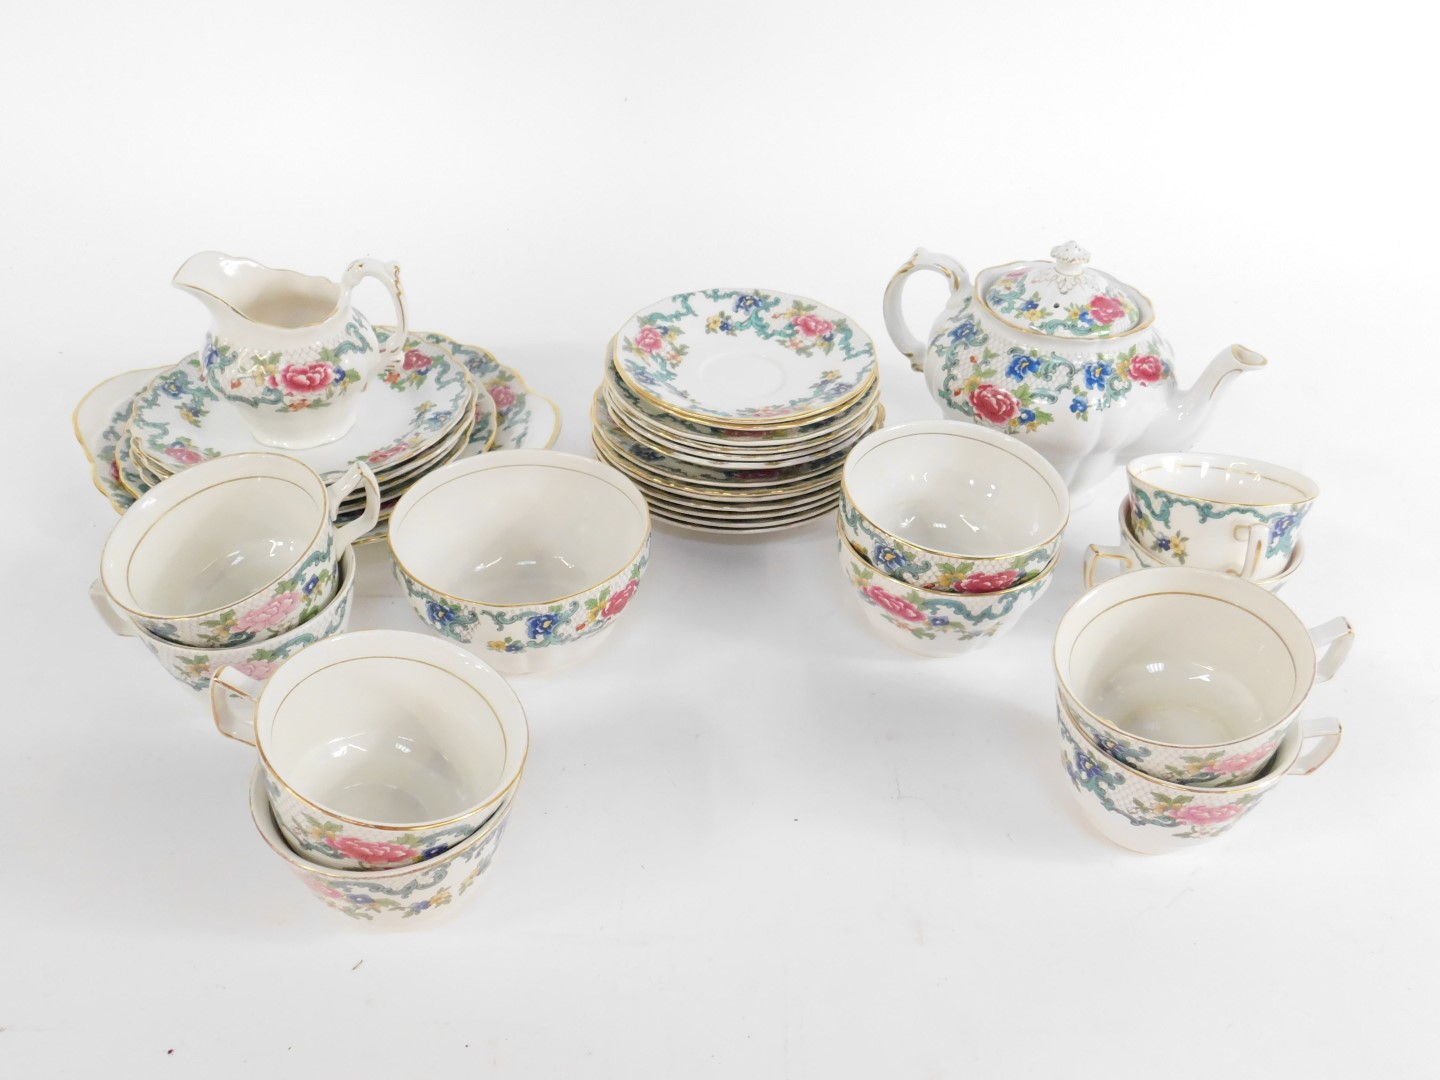 A Royal Doulton and Booths pottery and porcelain part tea service, decorated in the Floradora